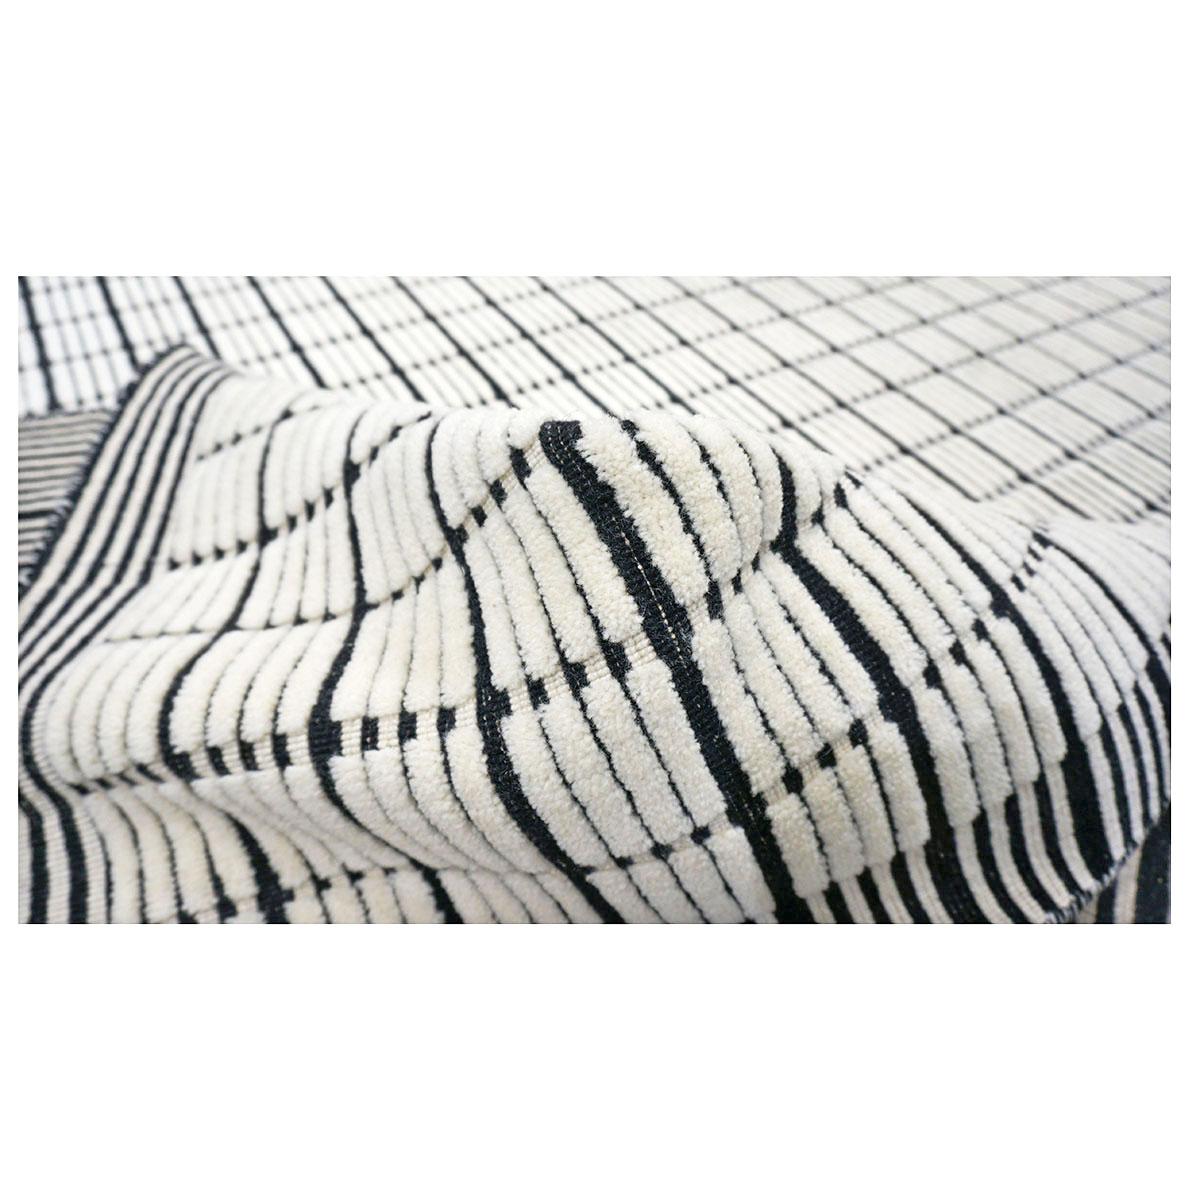 21st Century Modern 3D Wool 12x14 White & Black Handloom Area Rug In Excellent Condition For Sale In Houston, TX